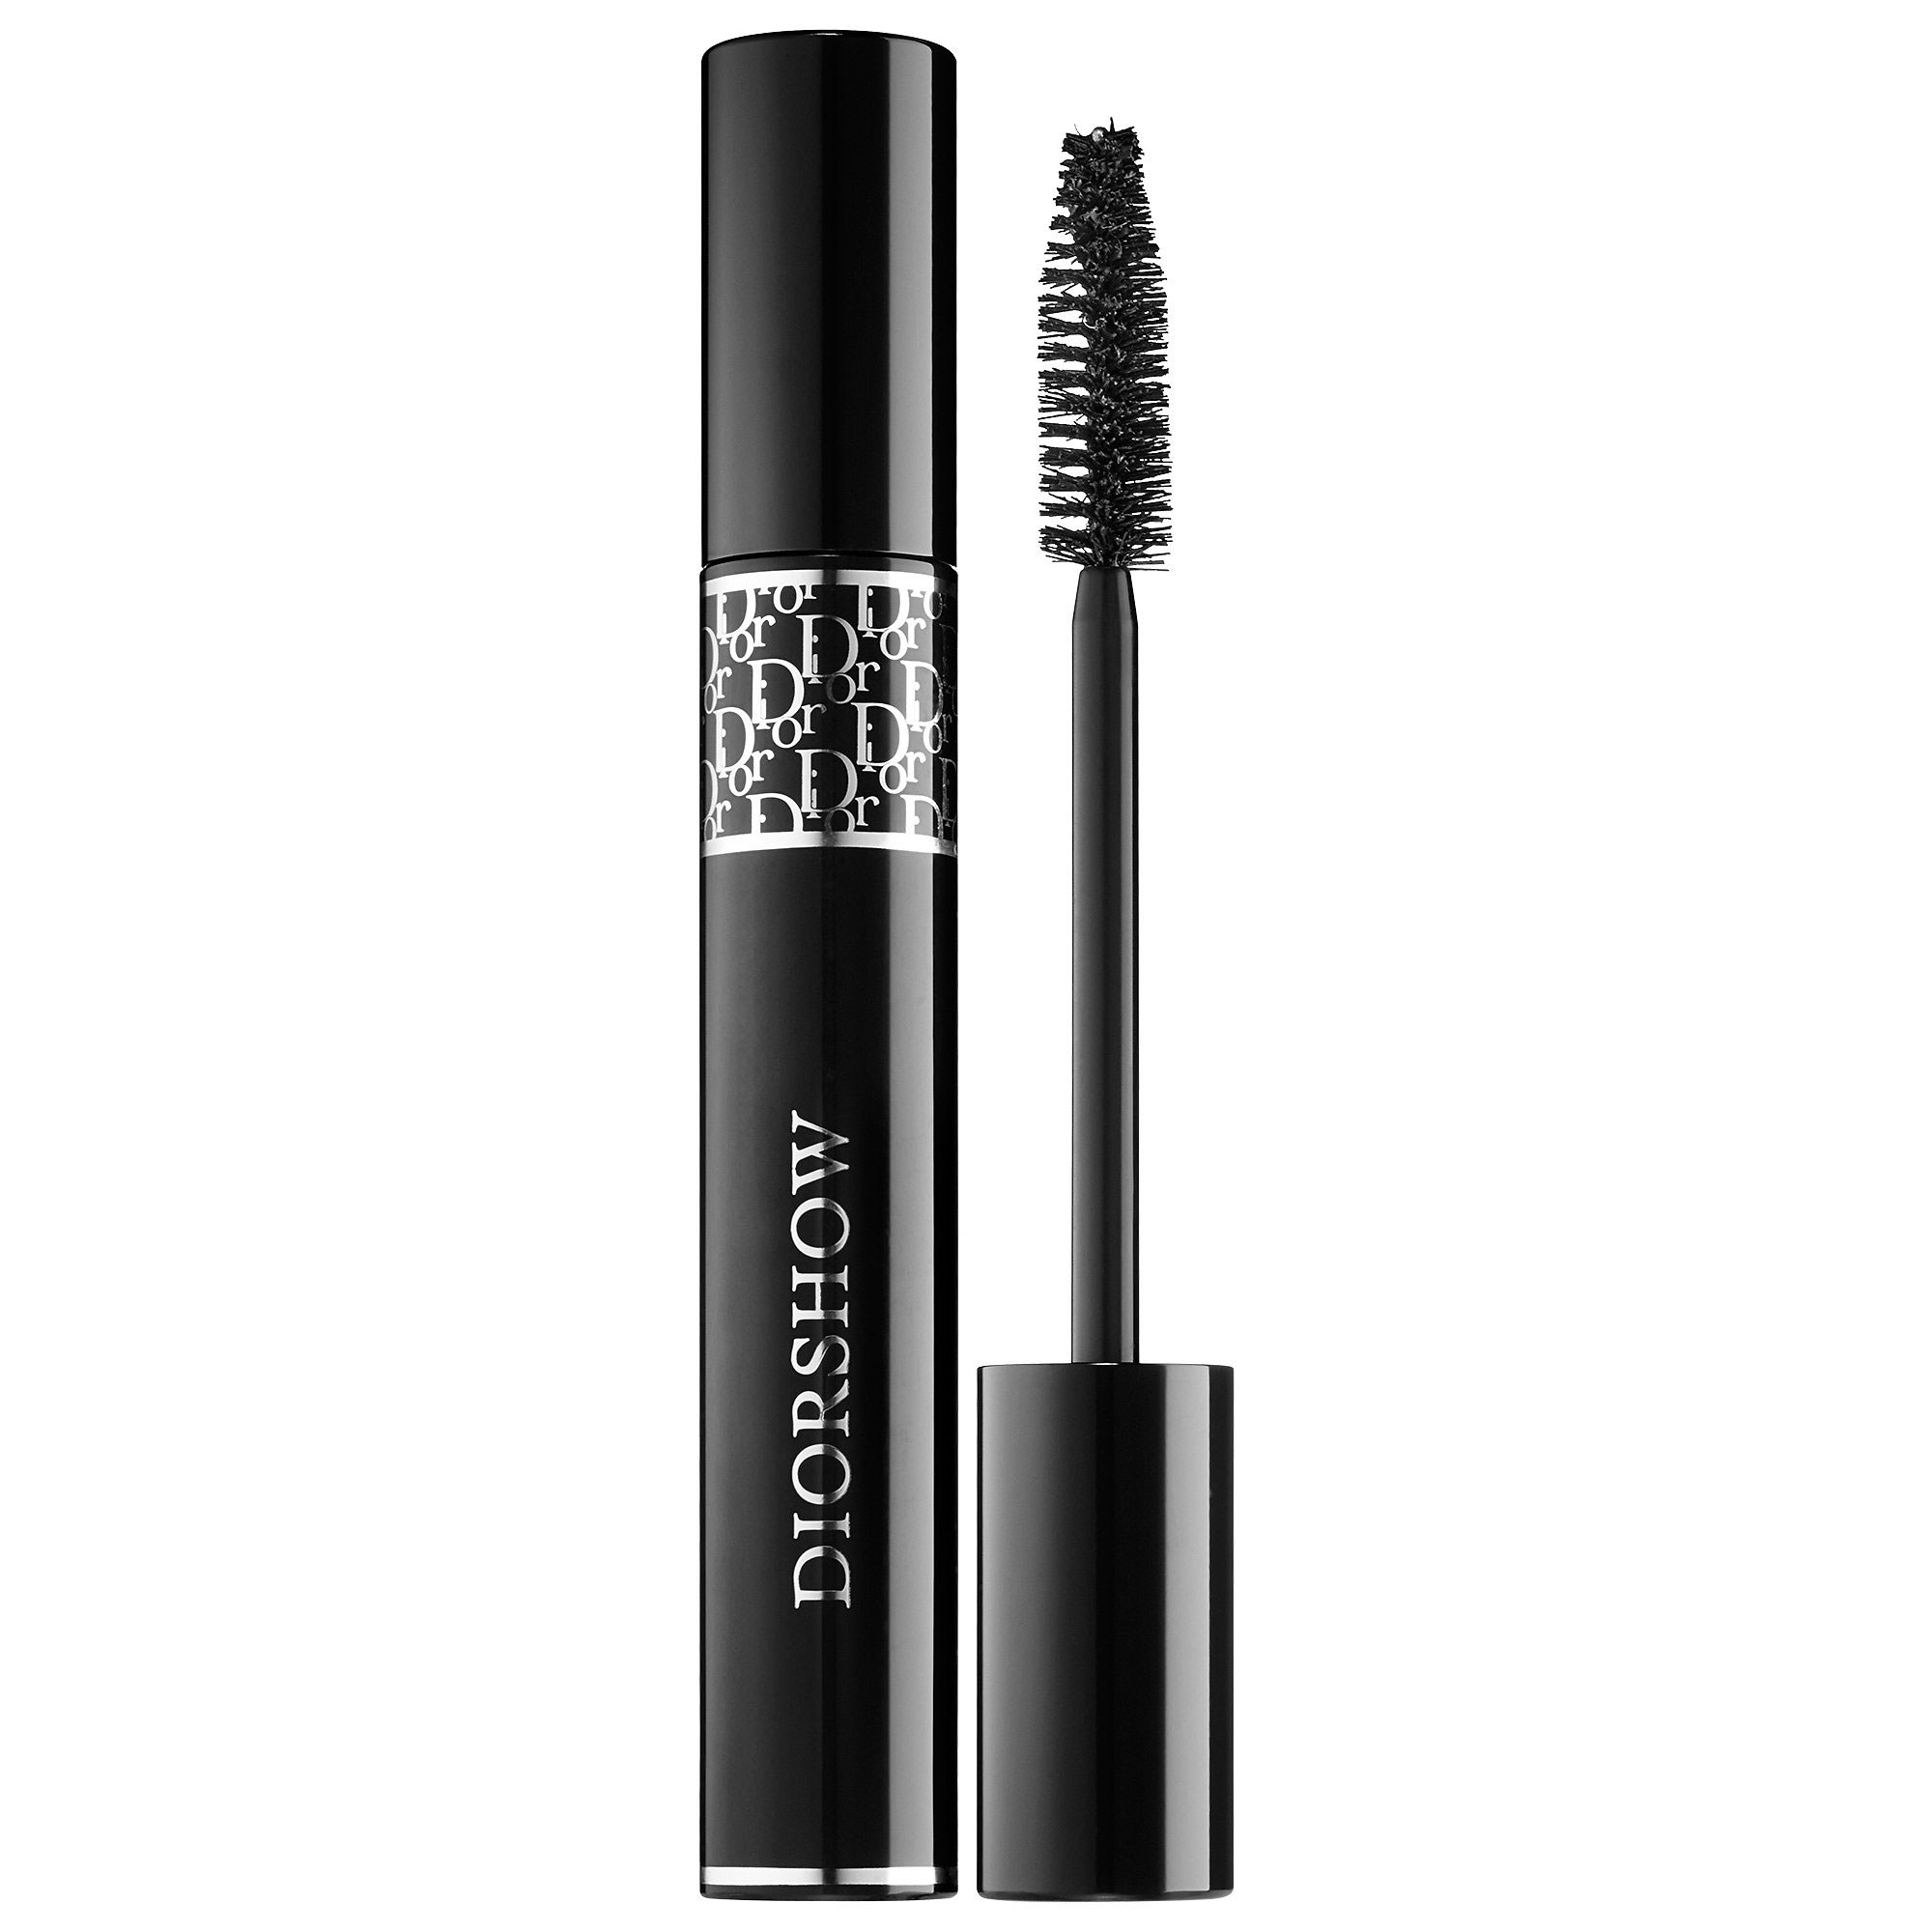 French Beauty Products Women Over 50: Dior Diorshow Mascara